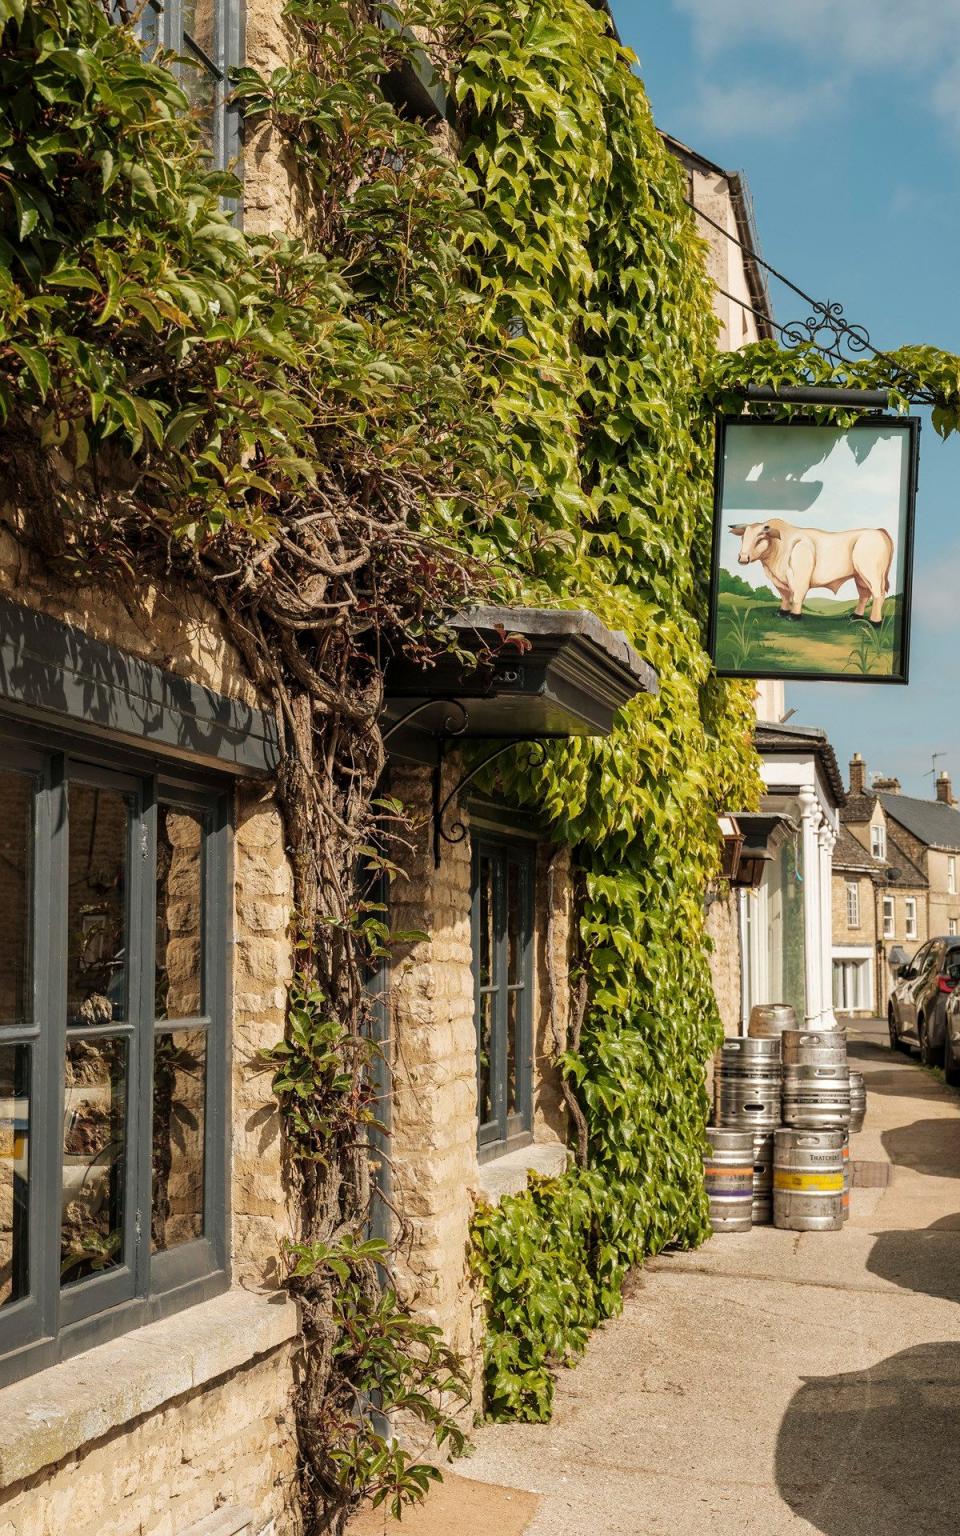 The Bull is a 16th-century pub with rooms in Charlbury, reopened in July